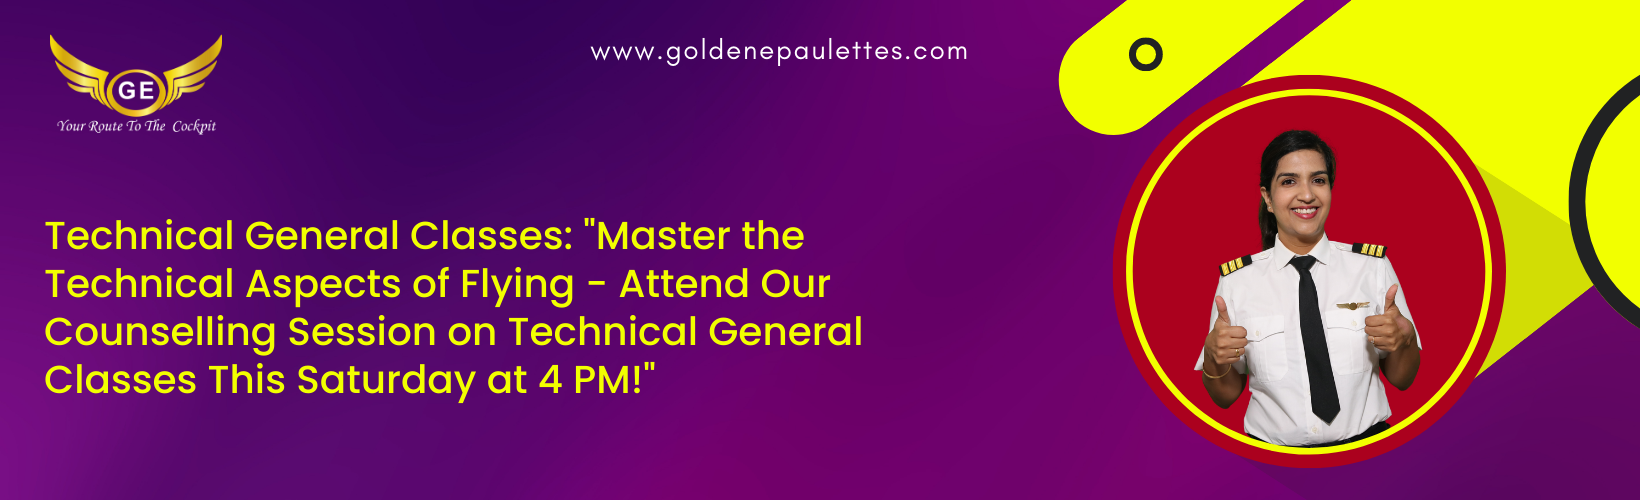 Join Our Comprehensive Classes and Launch Your Aviation Career with Golden Epaulettes Aviation